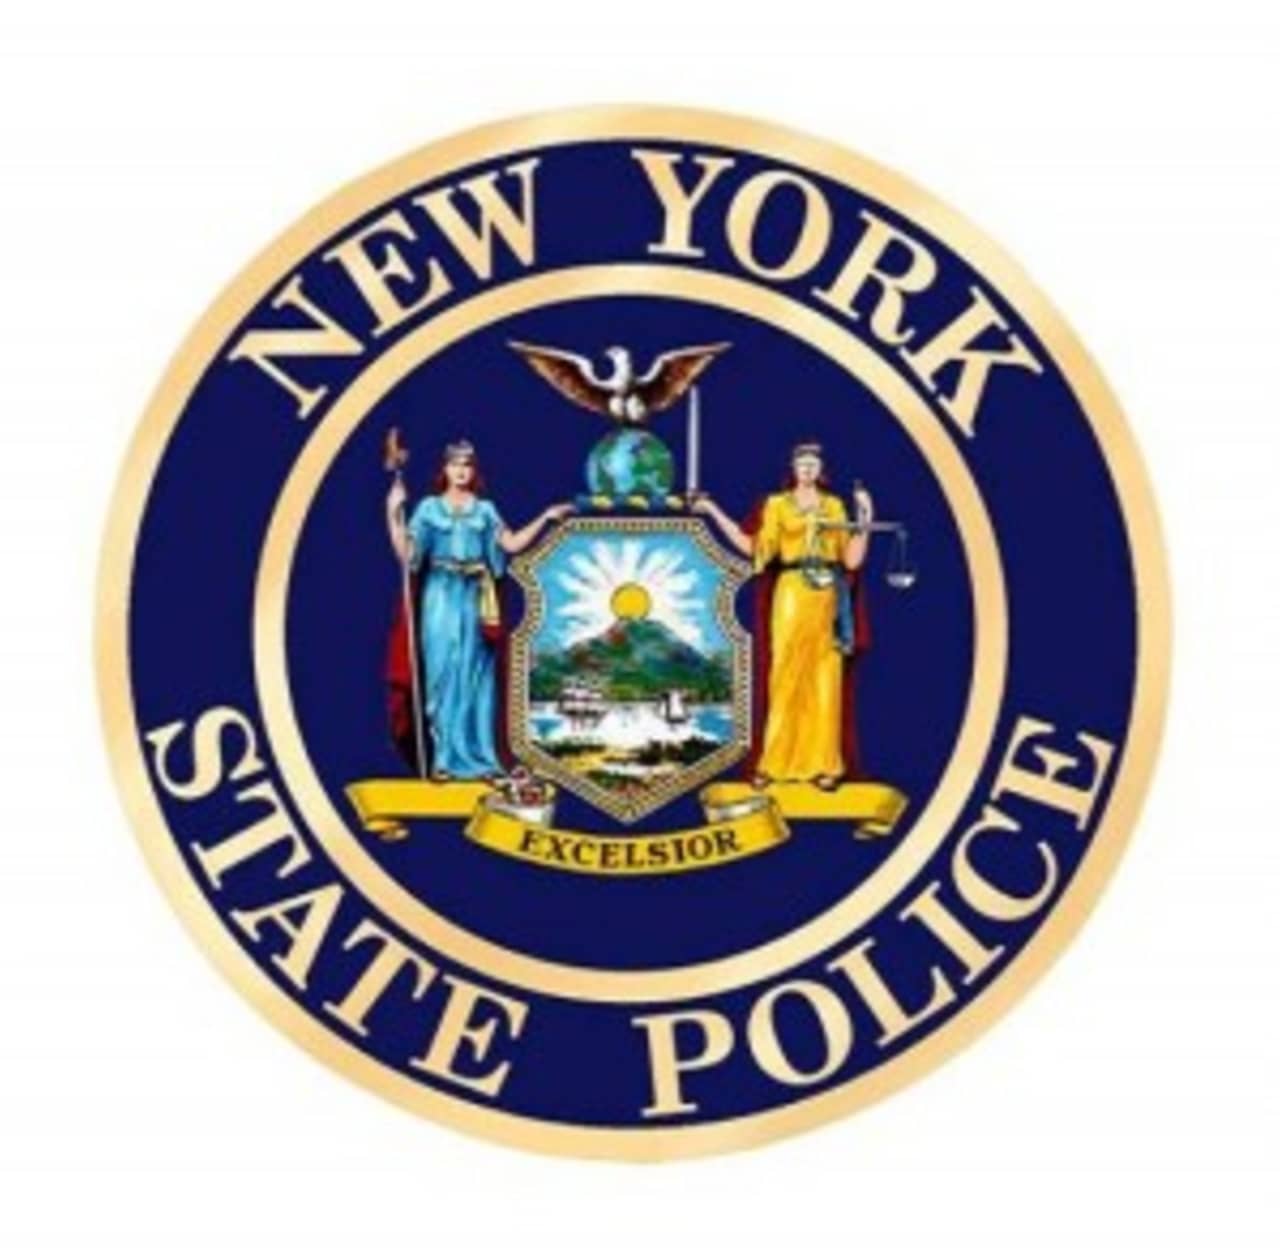 The man sent to the hospital Saturday after reportedly being stabbed in Somers has improved and is resting in stable condition, New York State Police said.  